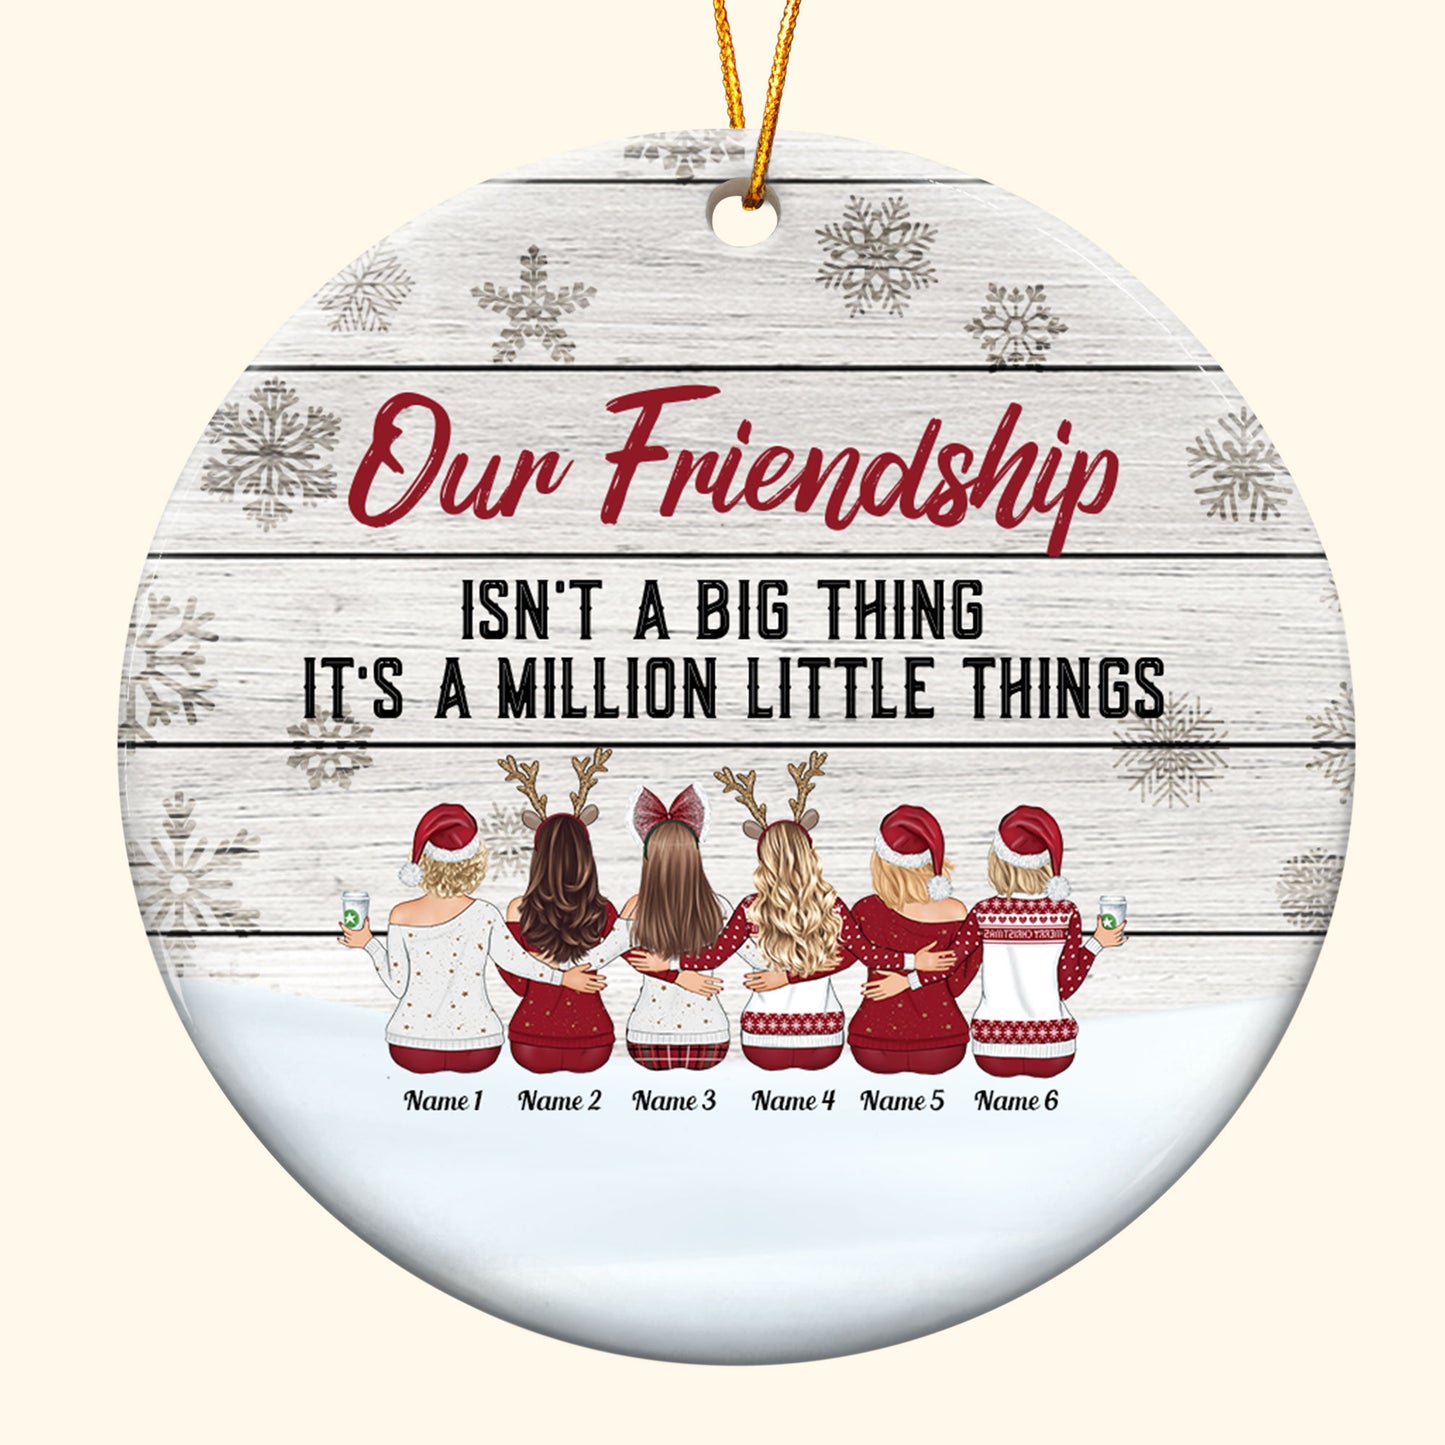 Our Friendship This Christmas - Personalized Ceramic Ornament - Christmas Gift For Besties, Best Friends, BFF